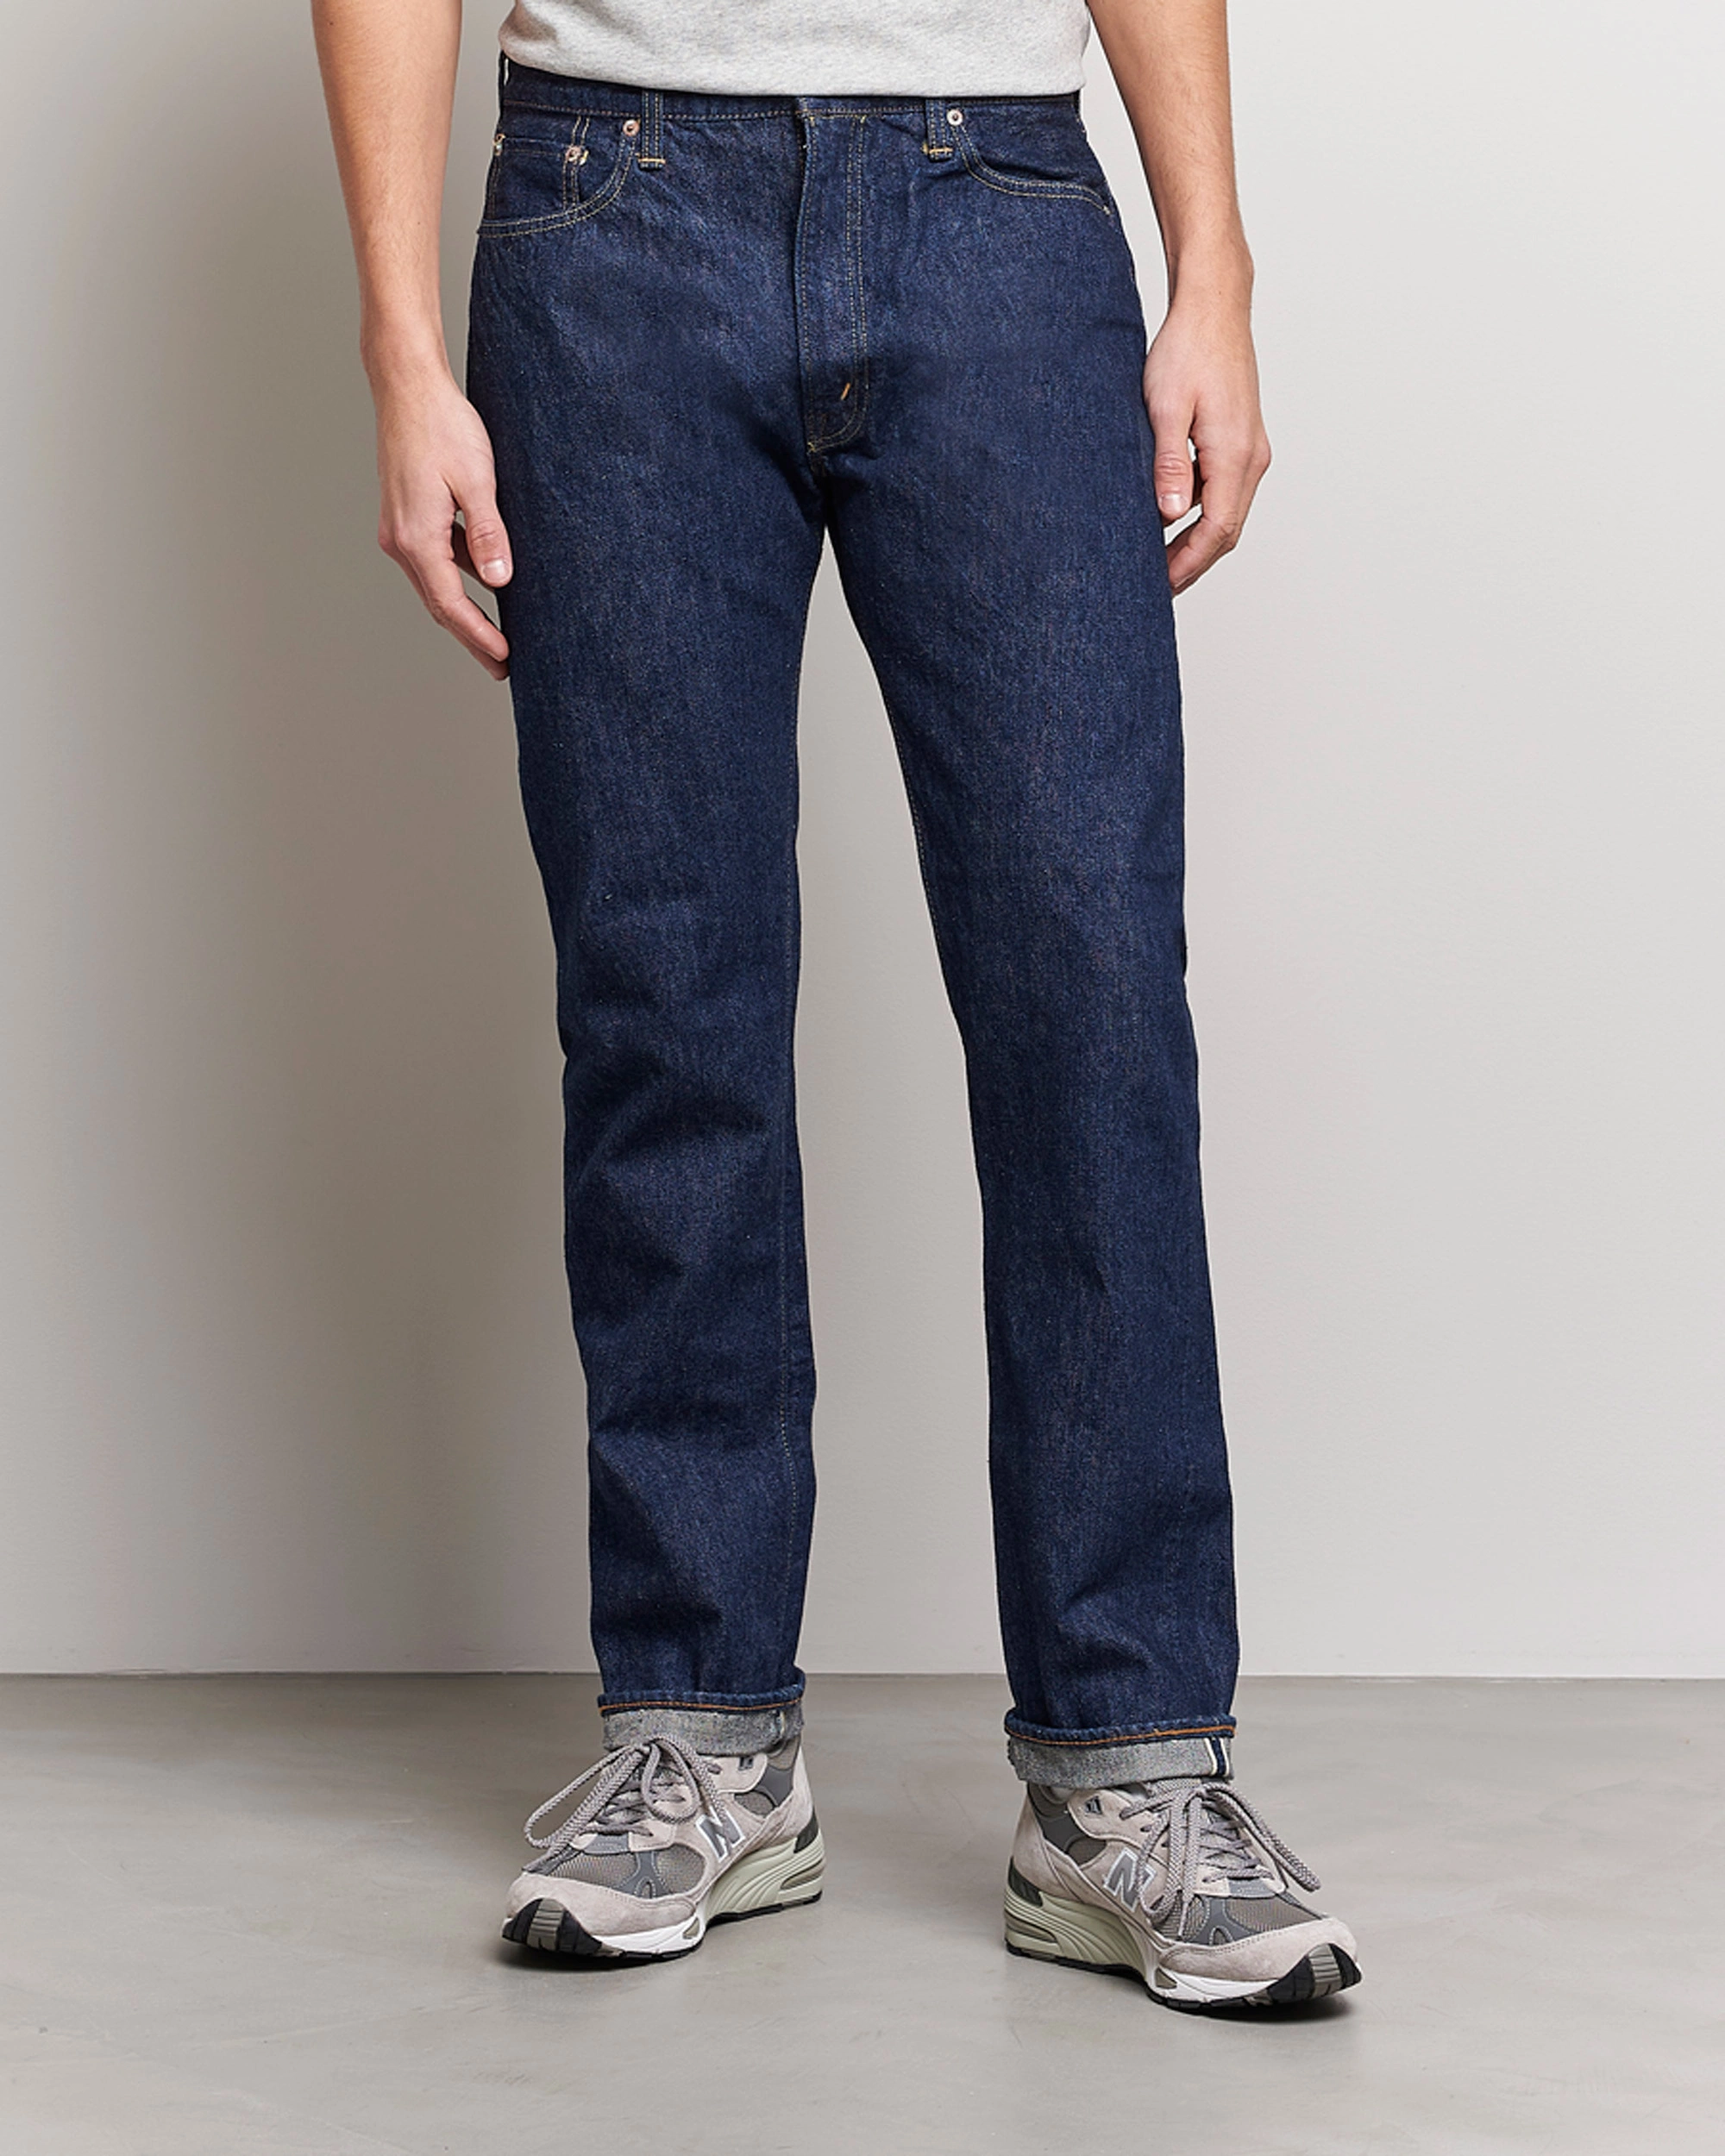 Herren | Blaue jeans | orSlow | Tapered Fit 107 Selvedge Jeans One Wash